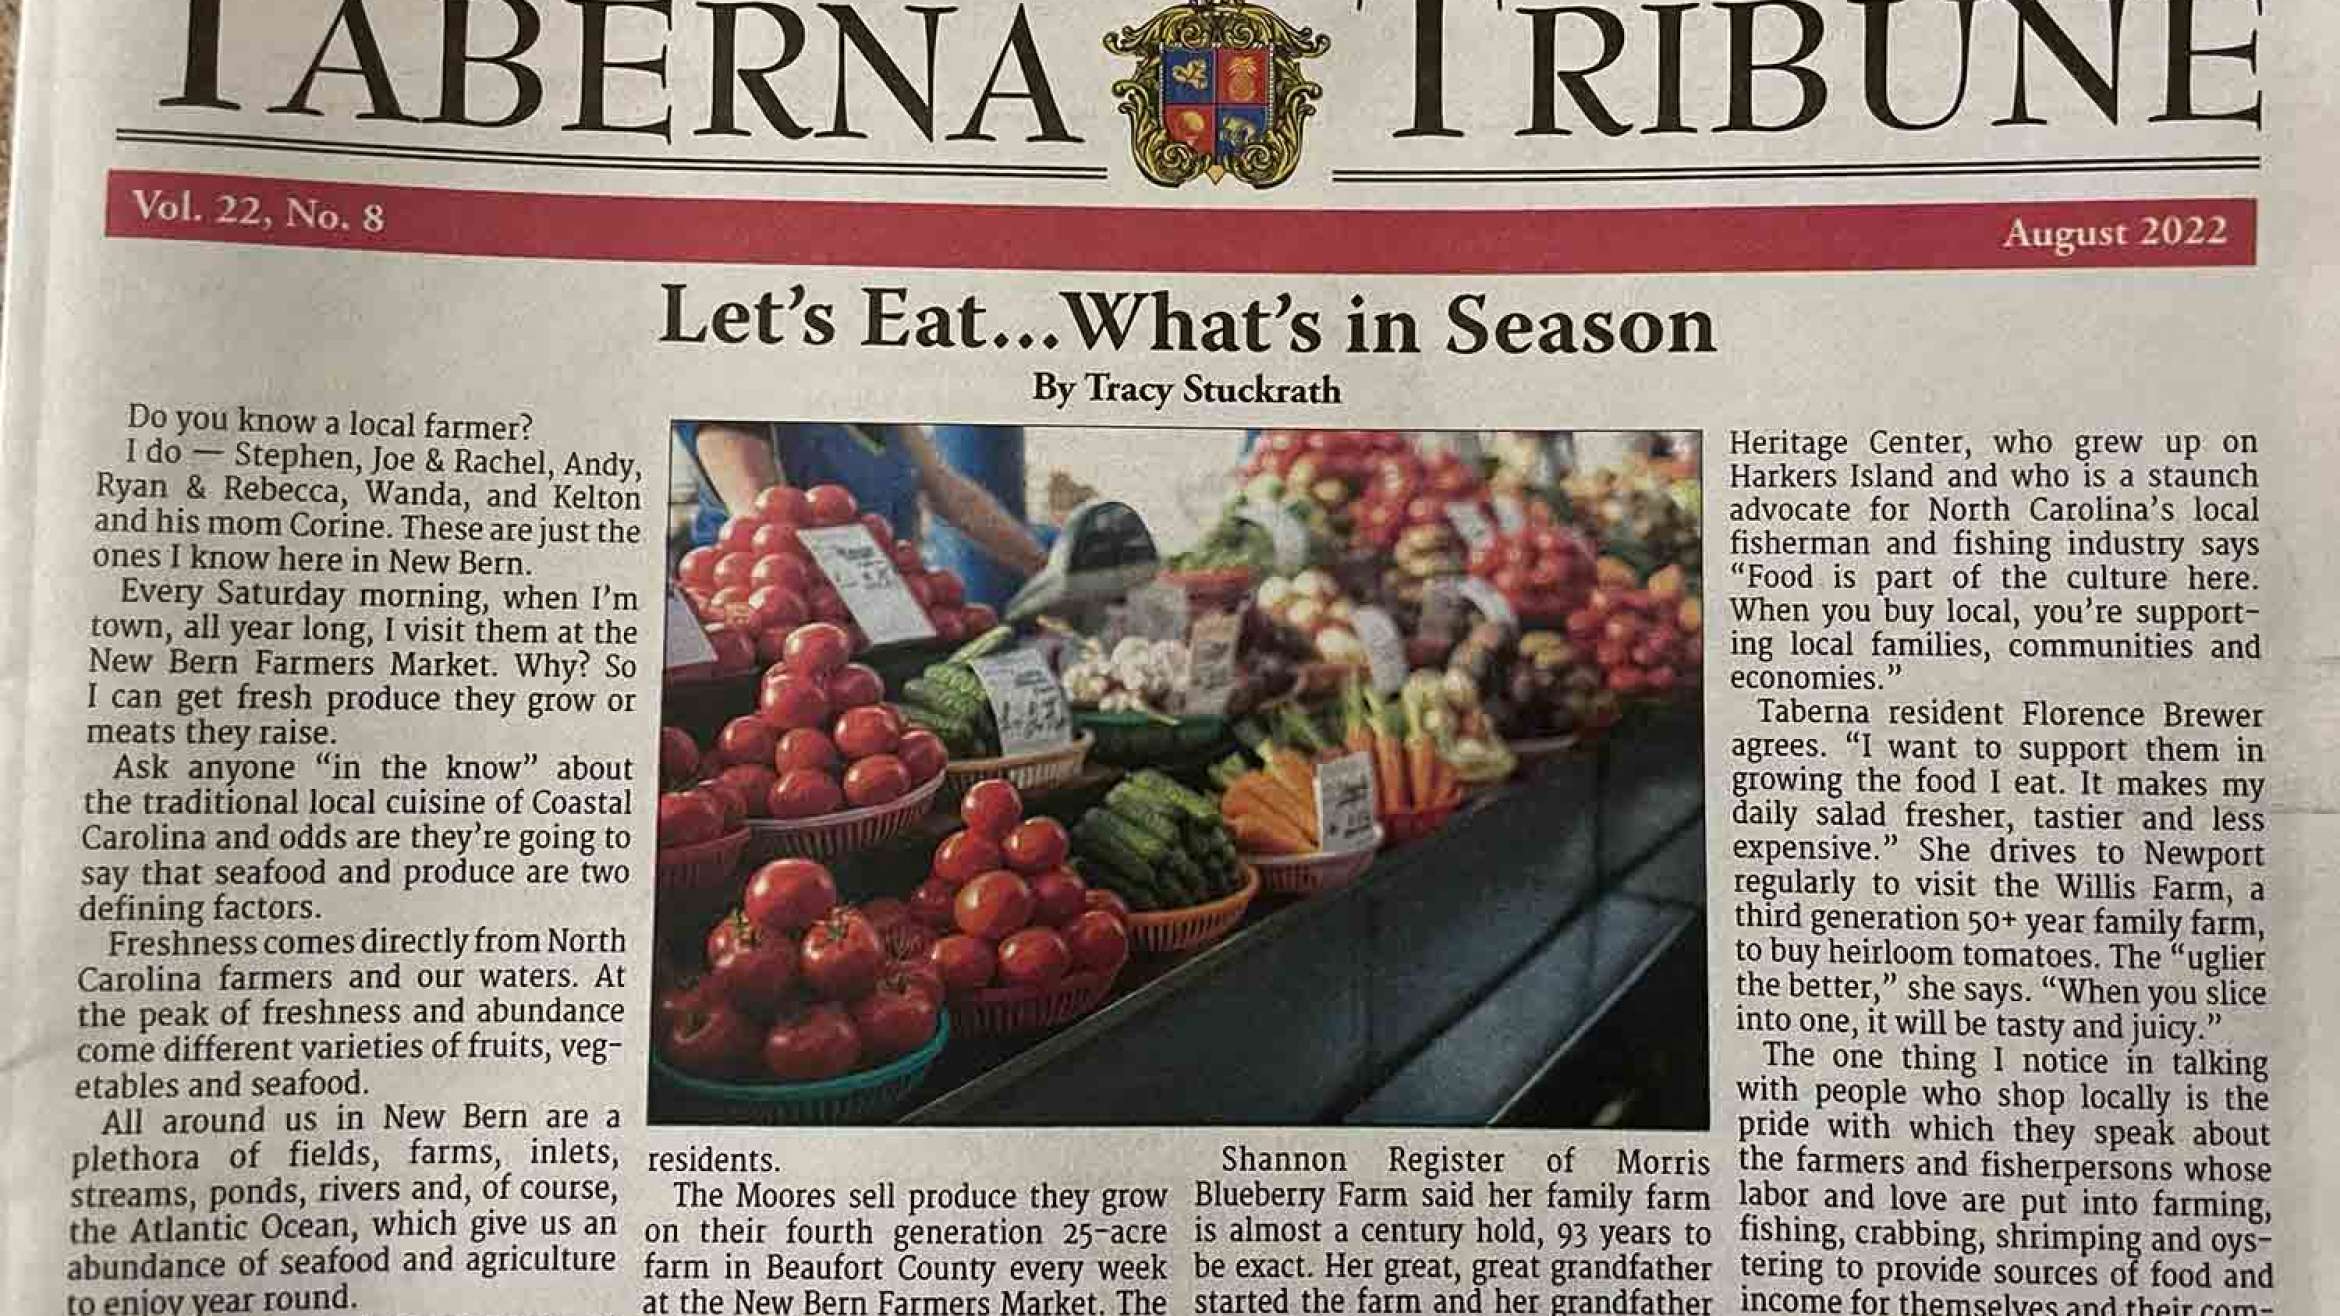 Front page of the Taberna Tribune with an article titled "Let's Eat...What's in Season" by Tracy Stuckrath